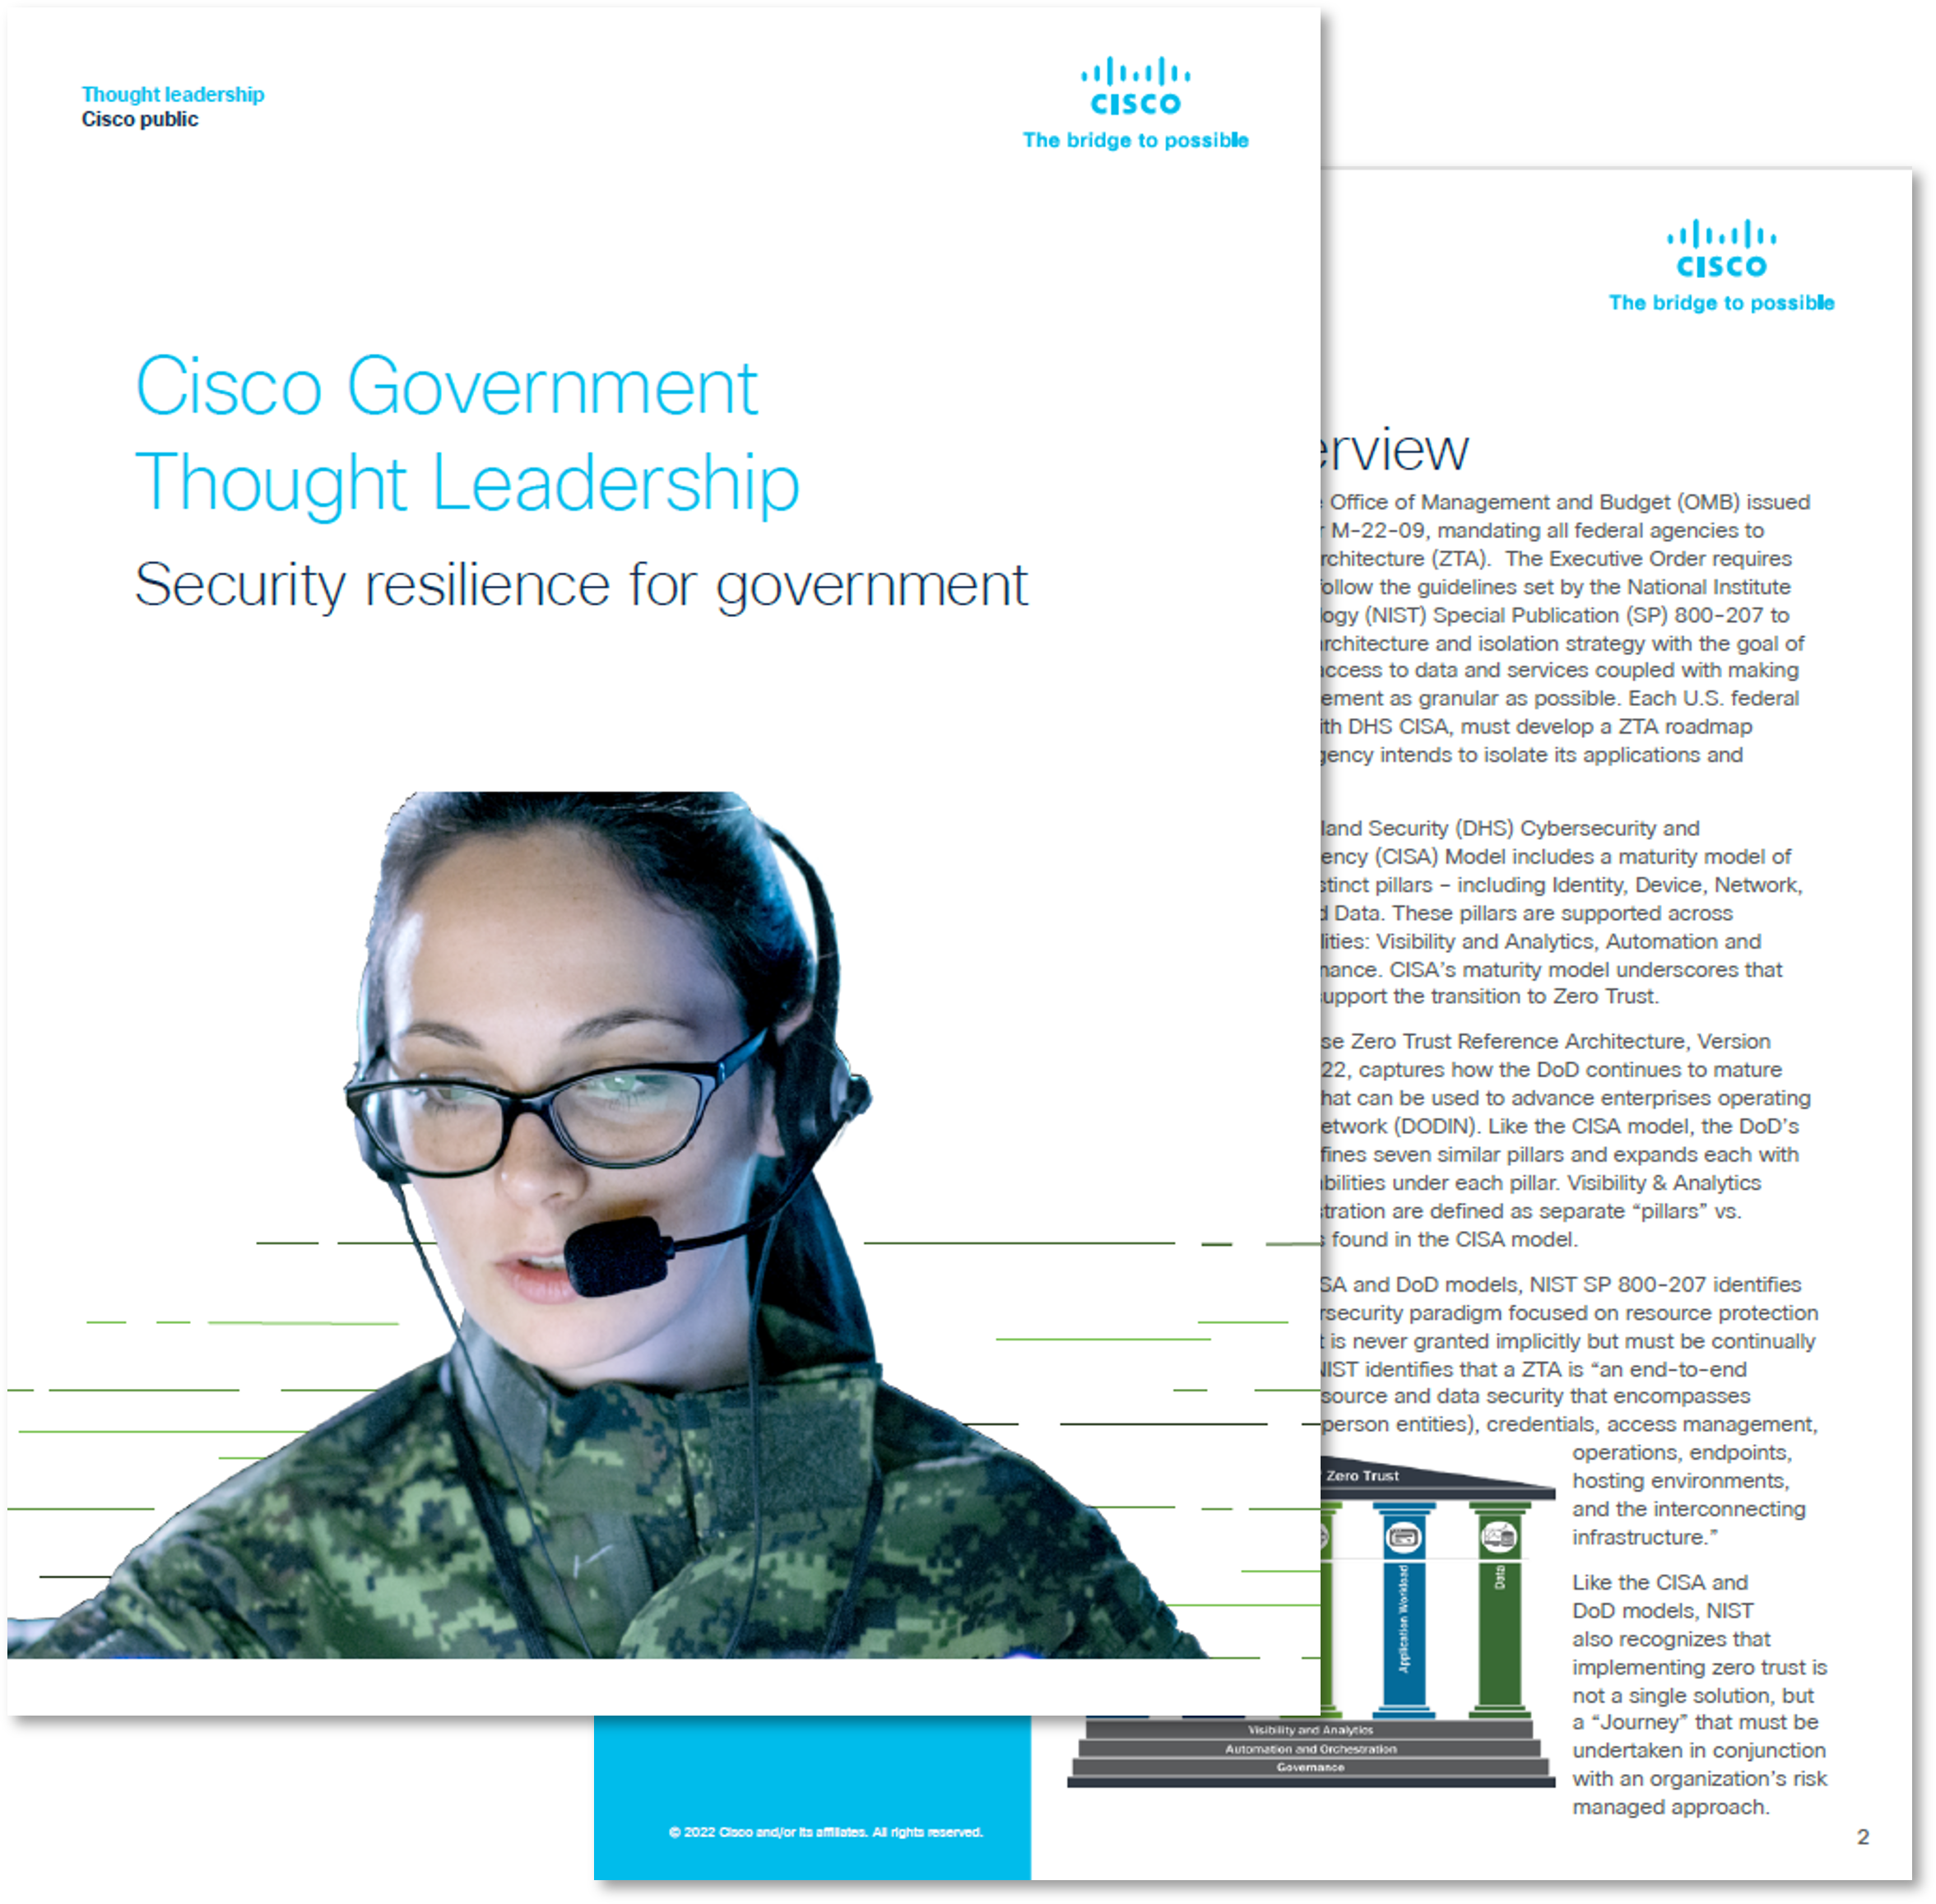 Cisco Government Thought Leadership - Security relience for government